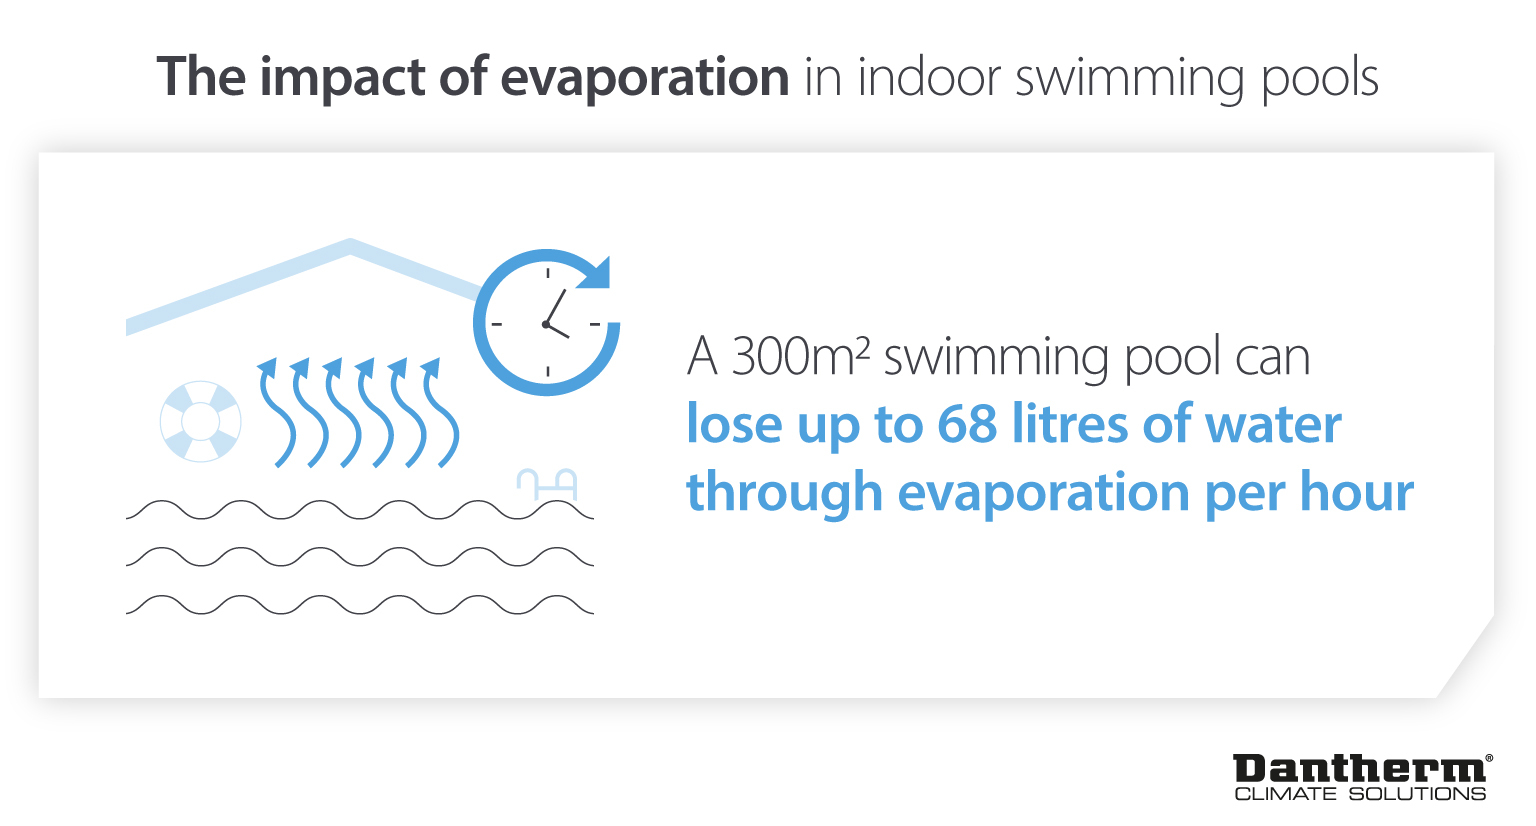 Impact of water evaporation from indoor swimming pools - lose up to 68 litres per hour in leisure centres - Infographic